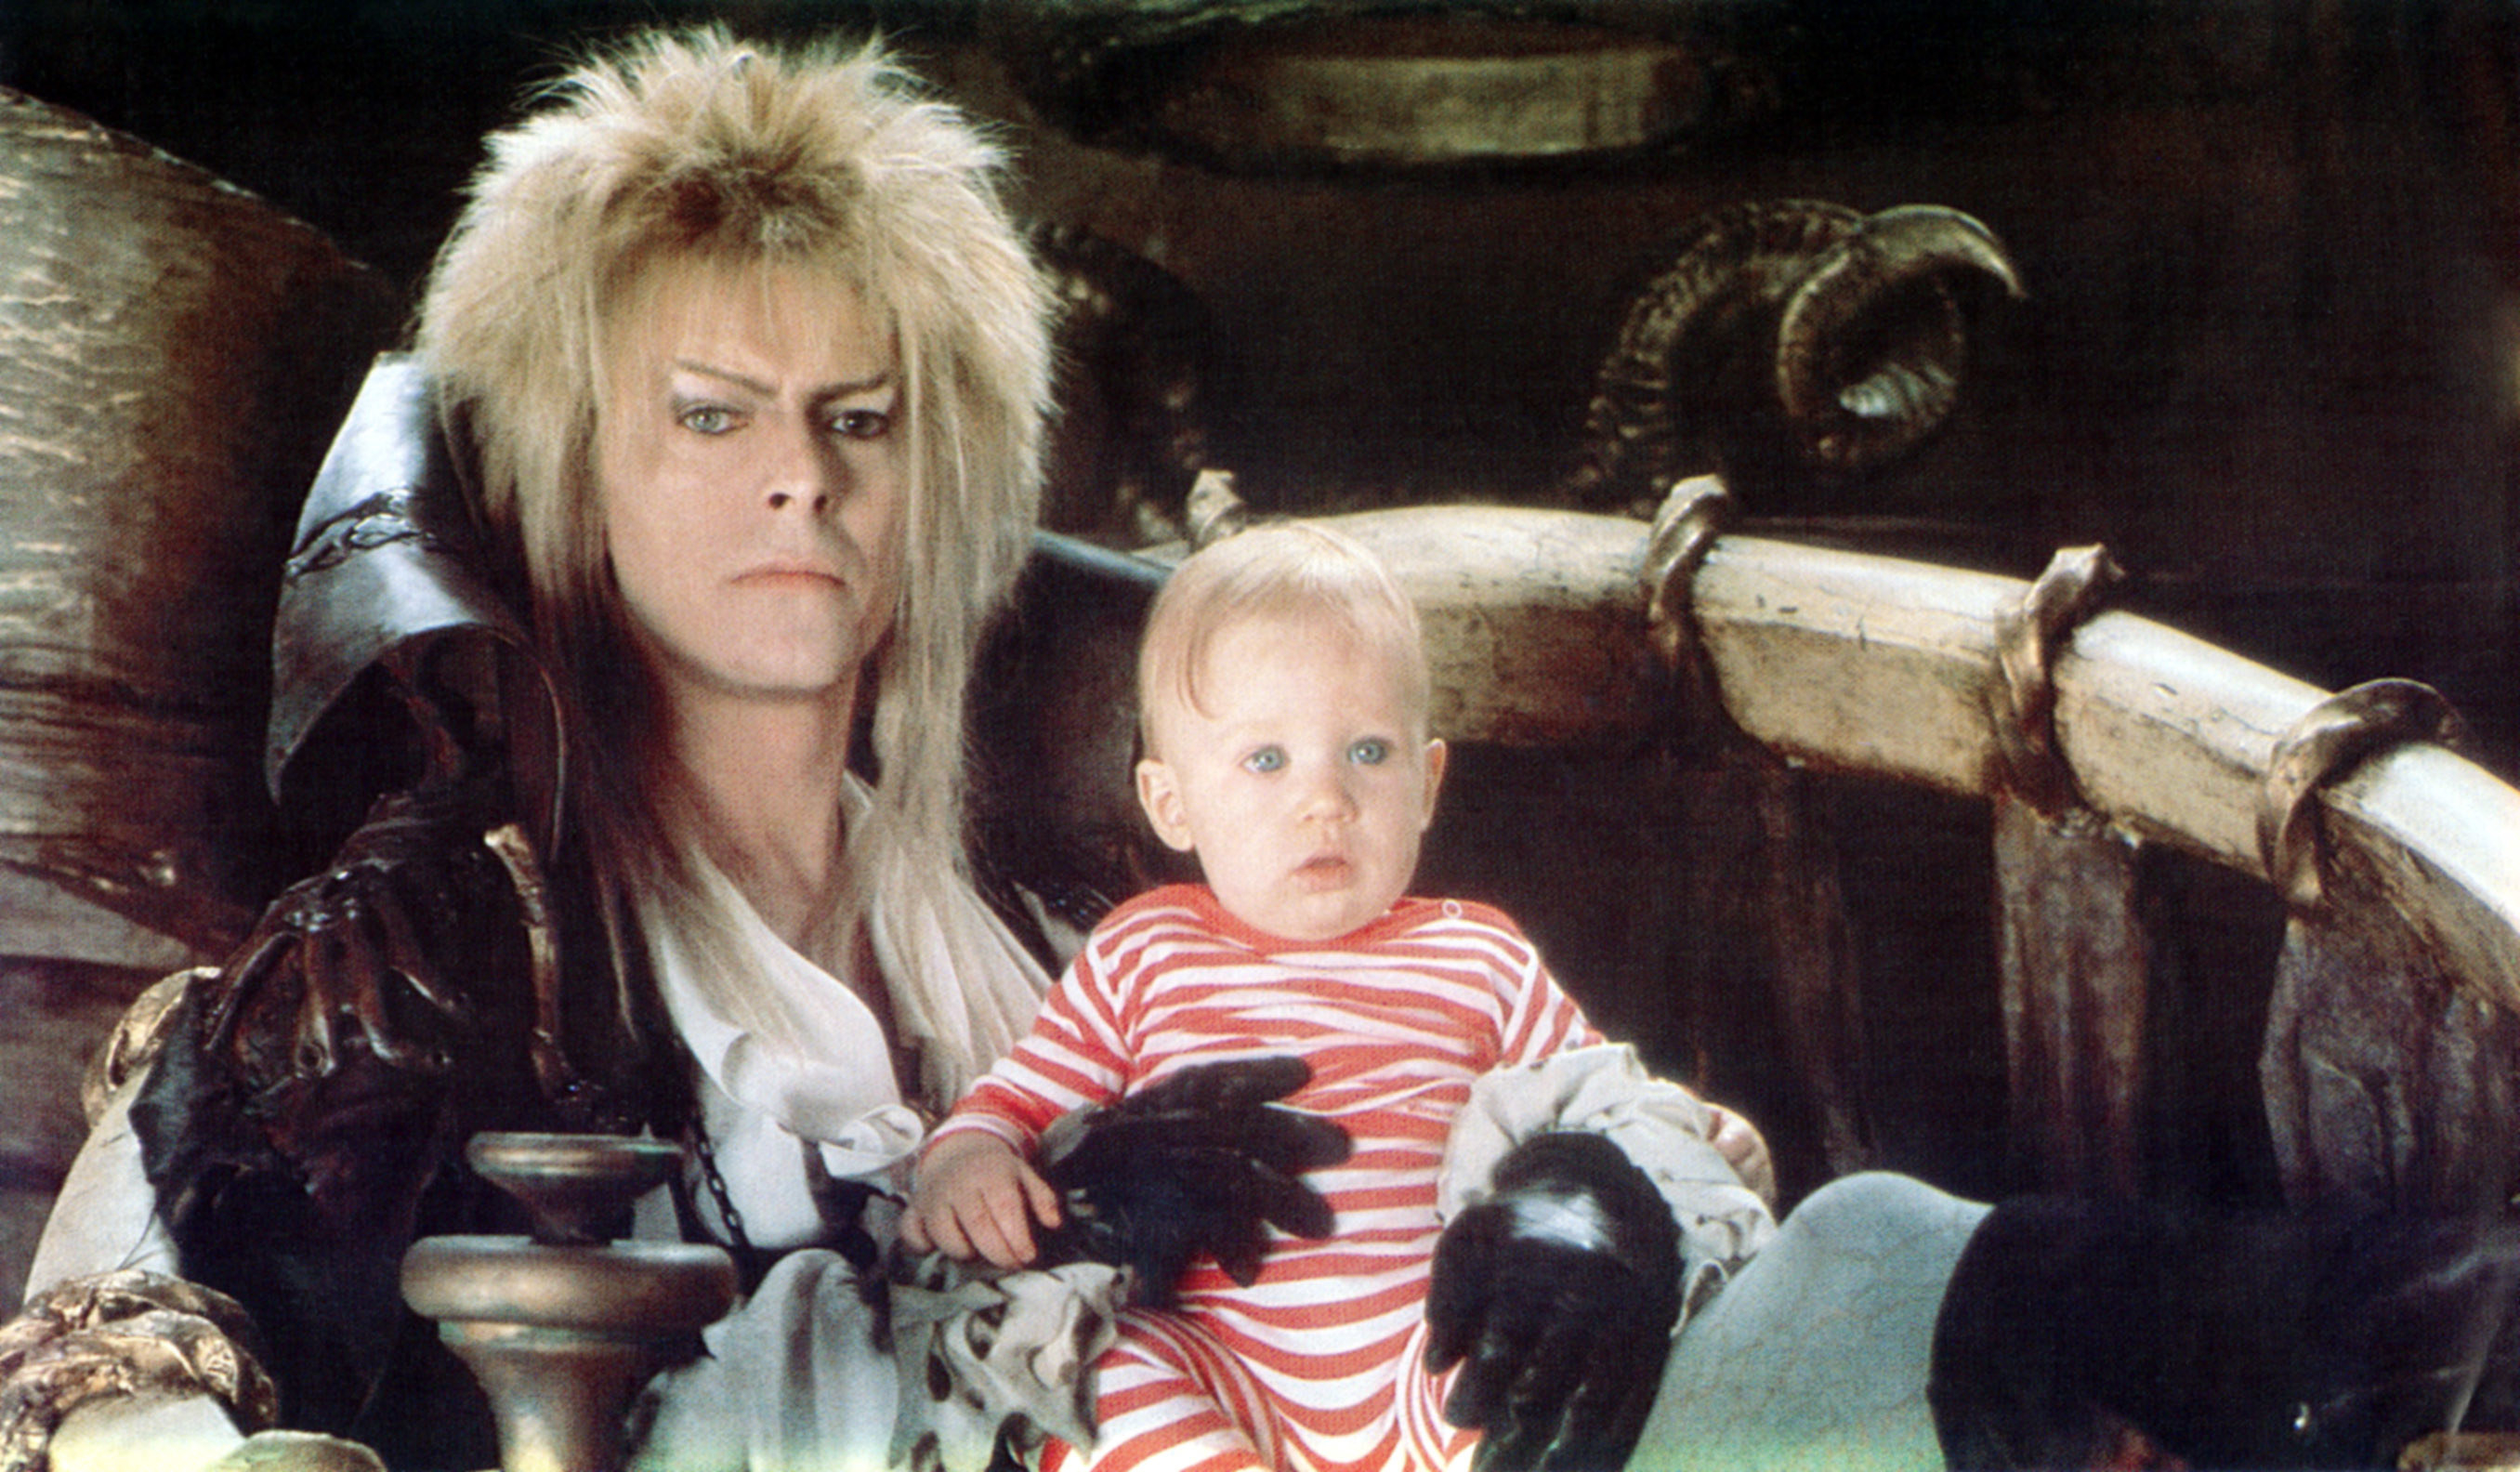 goblin king holding a baby